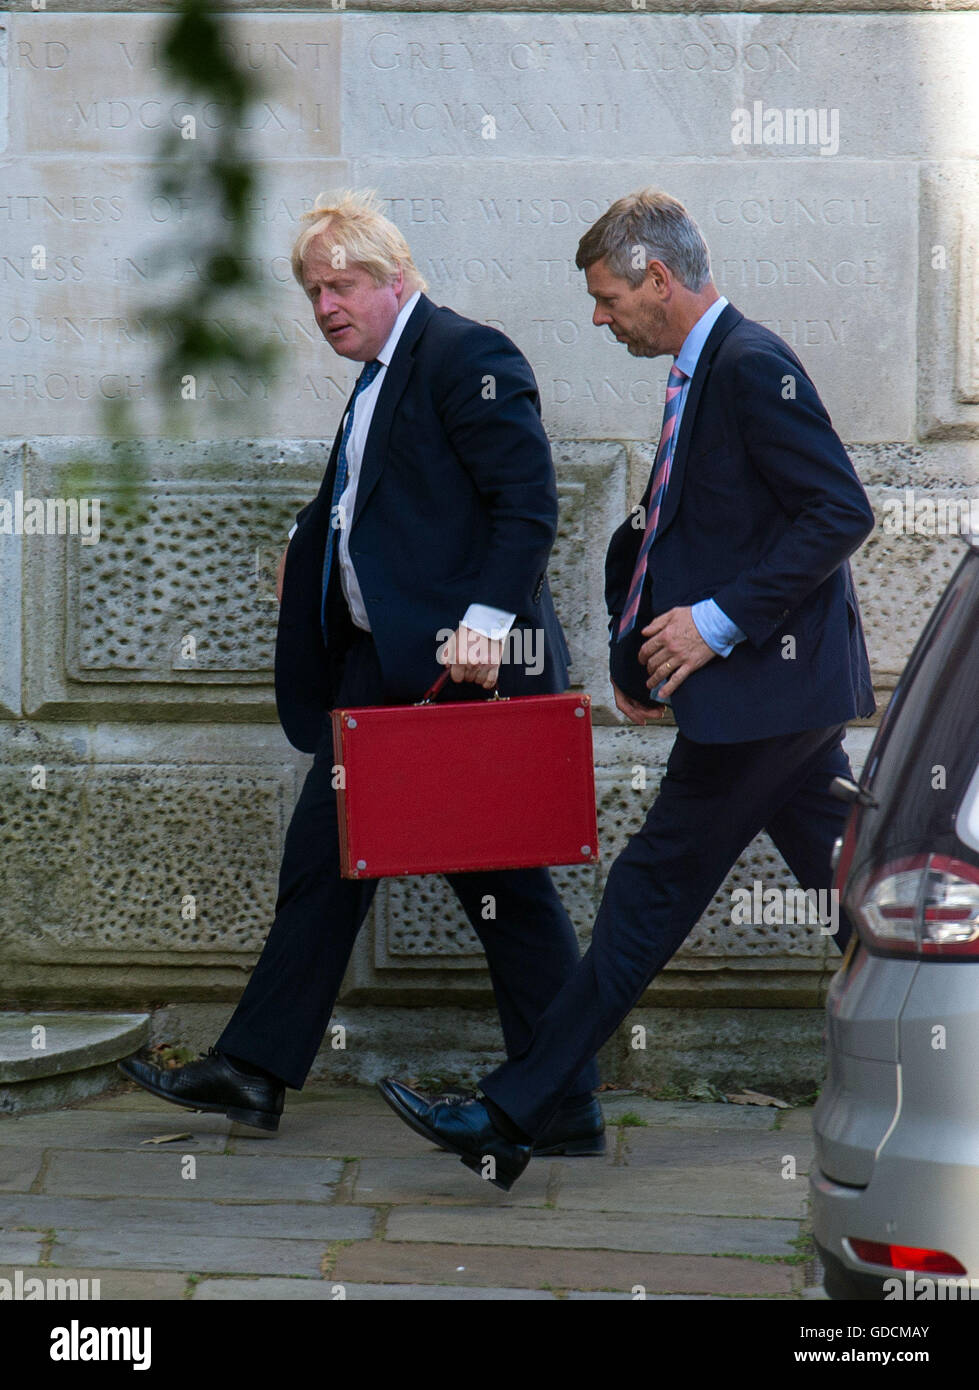 Foreign Secretary Boris Johnson (left) arrives at the Foreign Office in Westminster, London, as at least 84 people, including several children, died after a terrorist drove a truck through crowds celebrating Bastille Day in Nice. Stock Photo